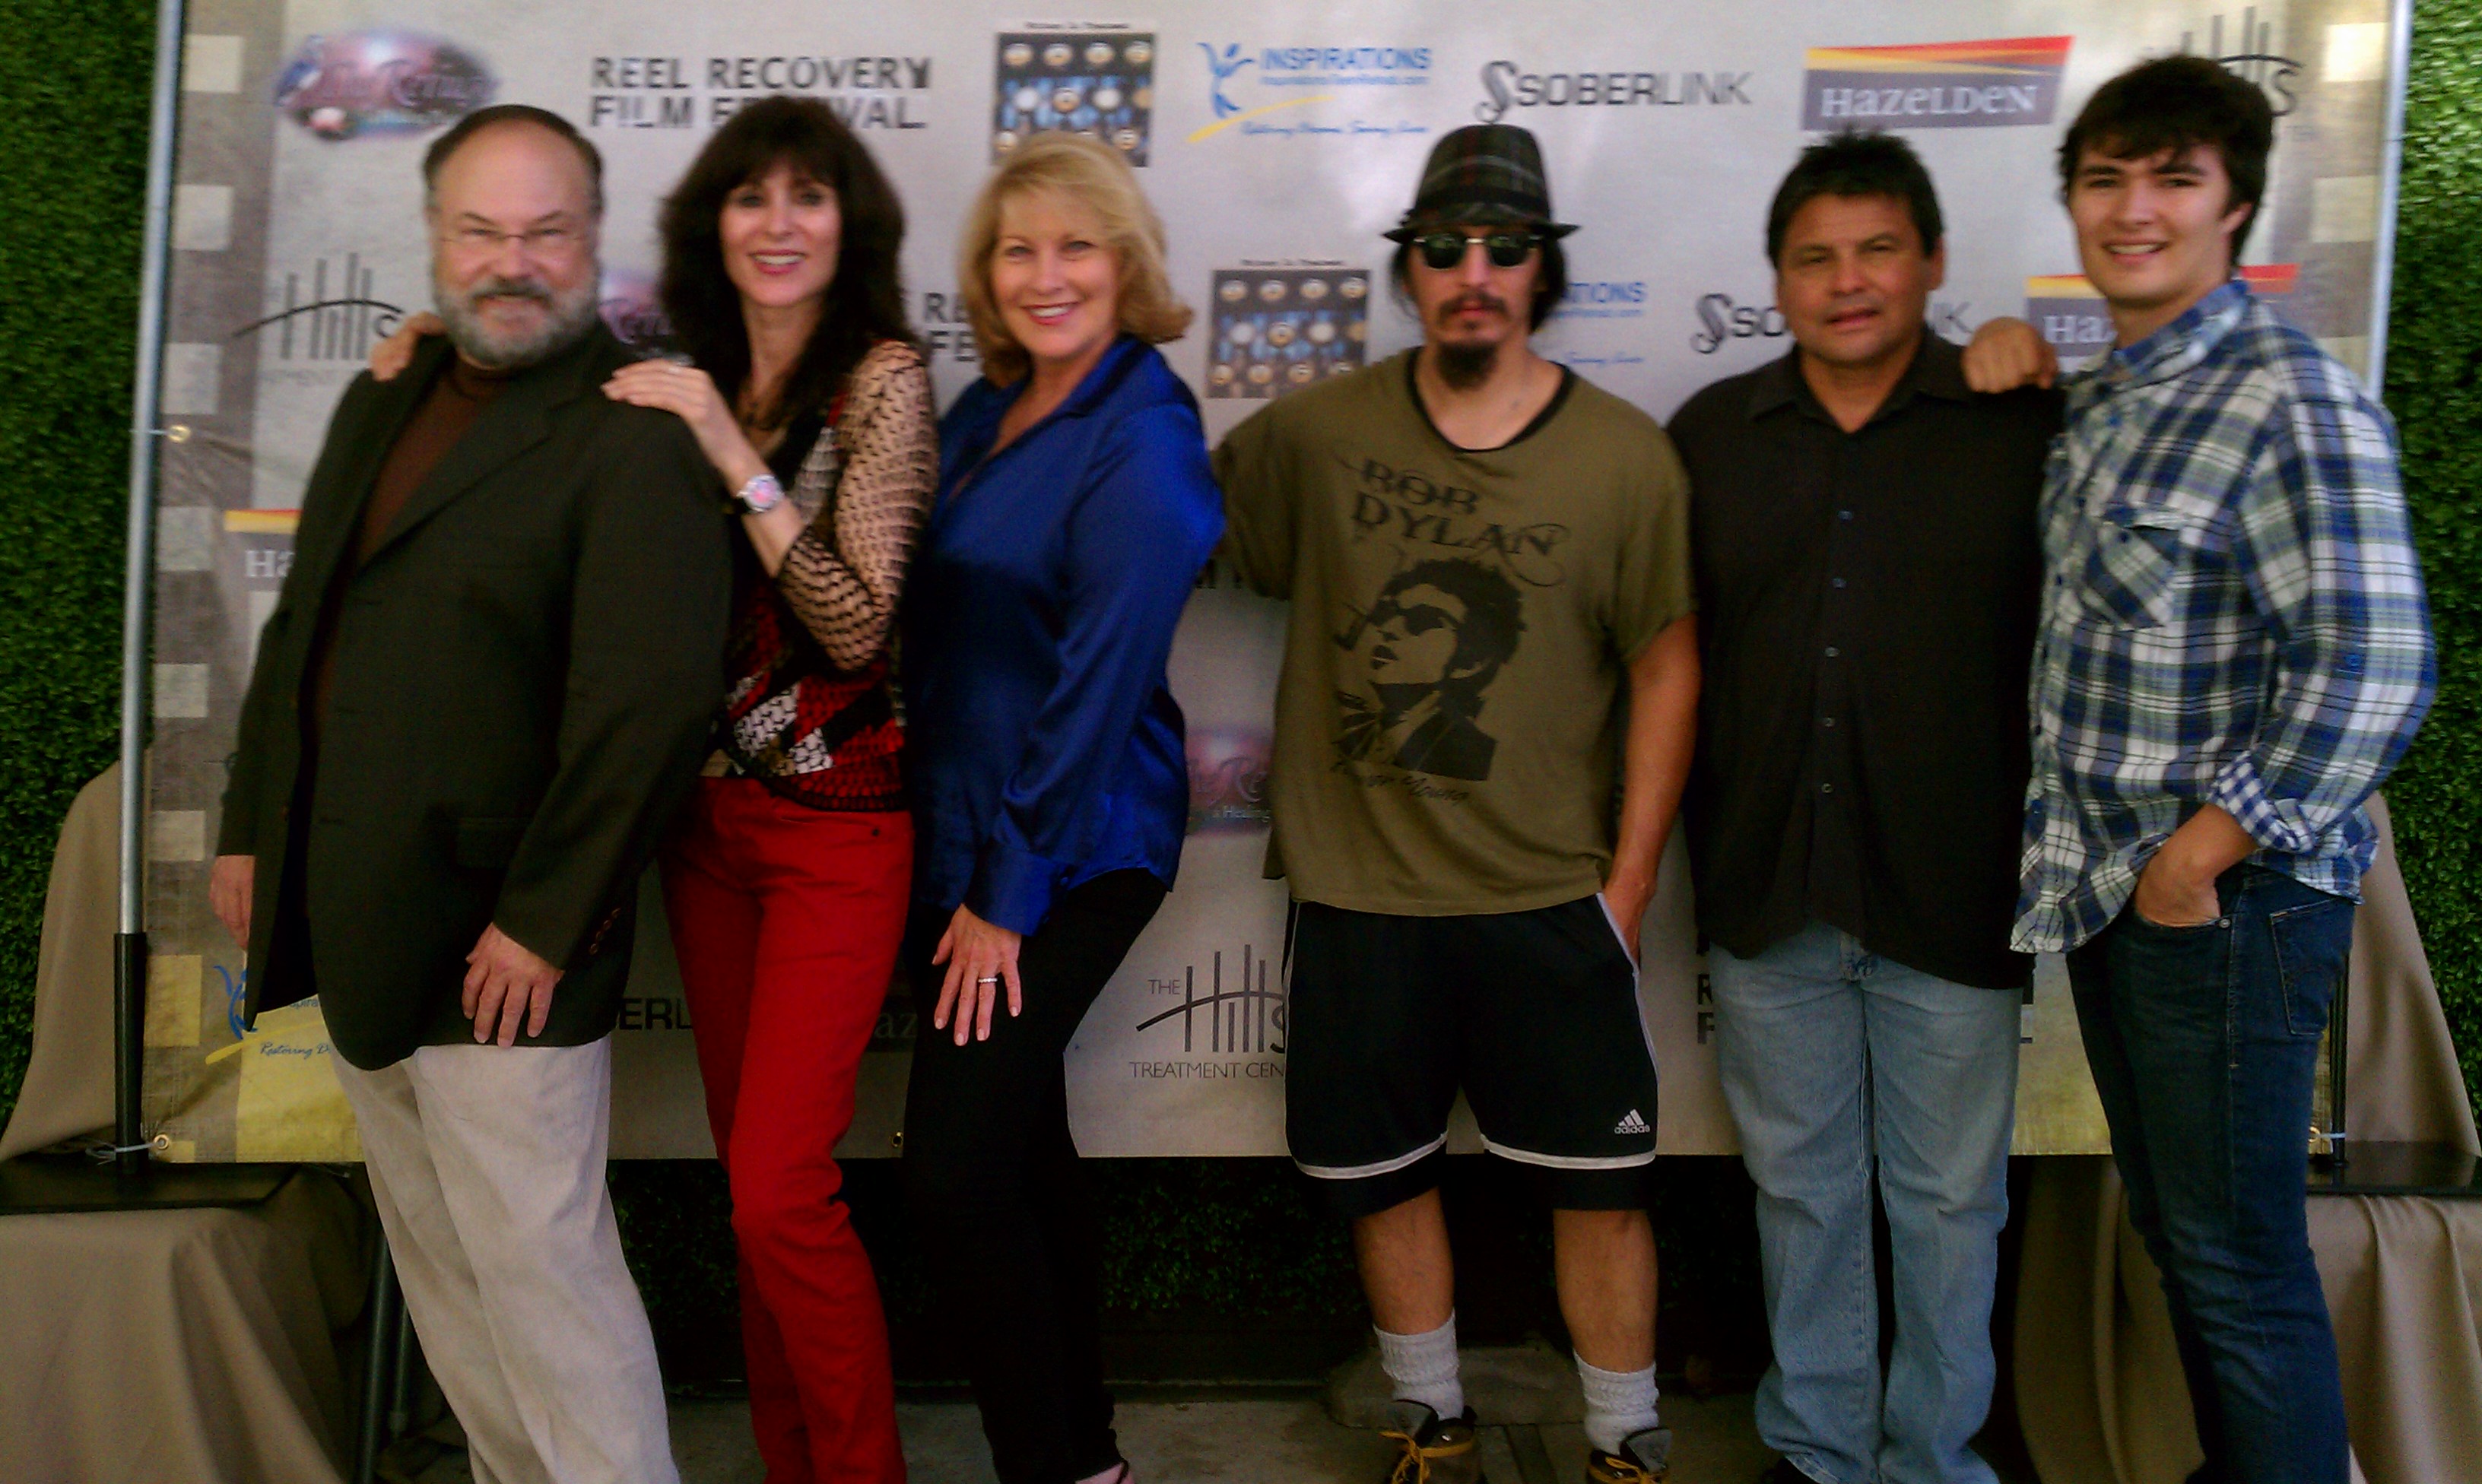 Catherine Carlen @ REEL RECOVERY FILM FESTIVAL cast and crew for: 